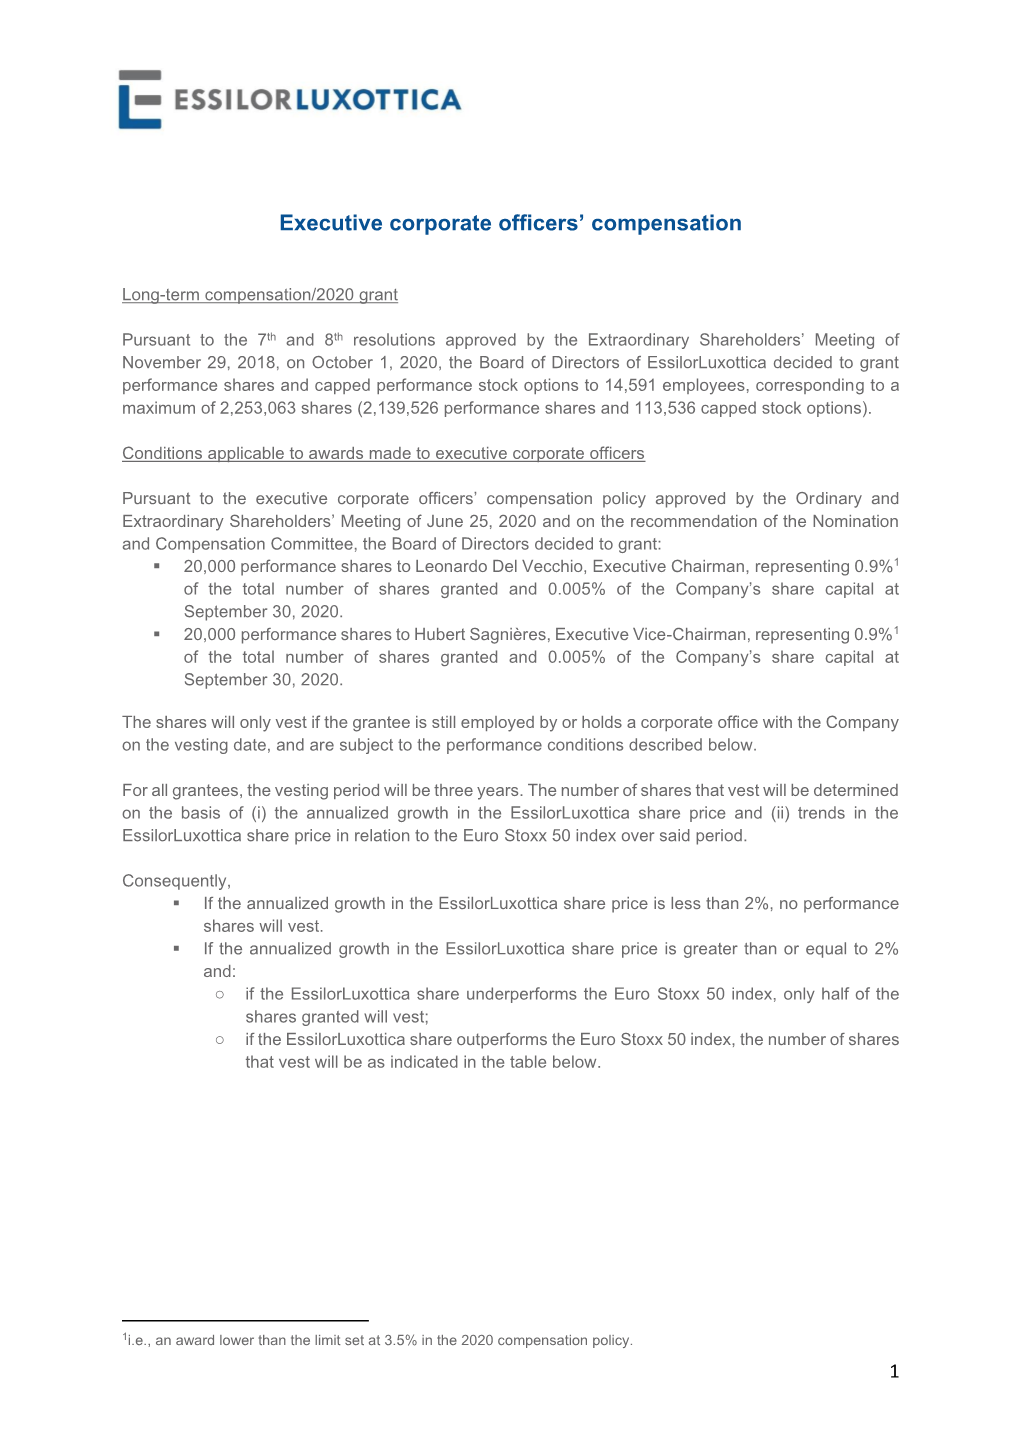 Executive Corporate Officers' Compensation